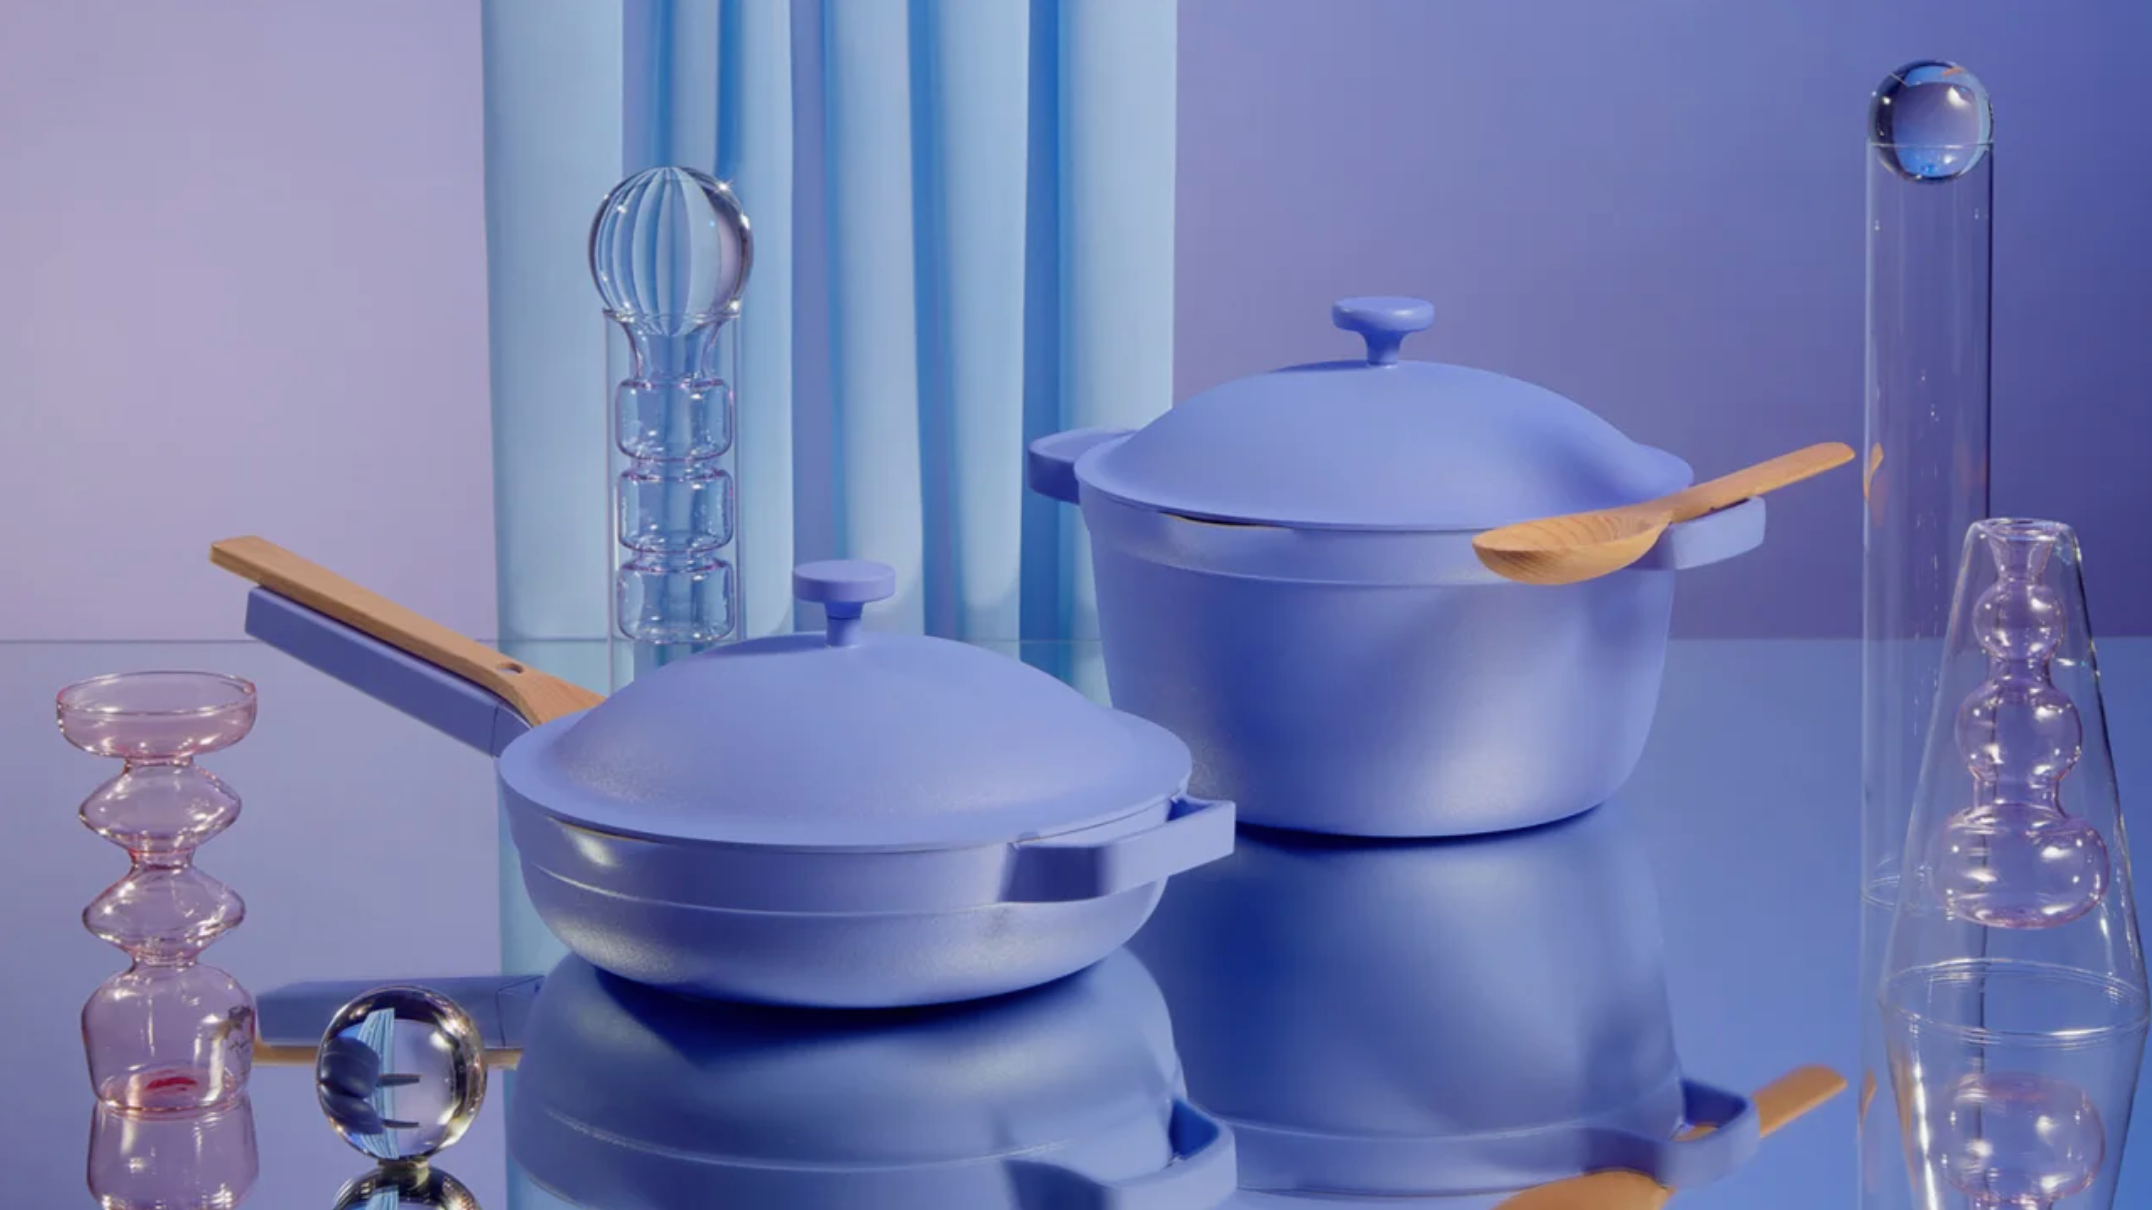 Selena Gomez Launches Second Cookware Collection with Our Place